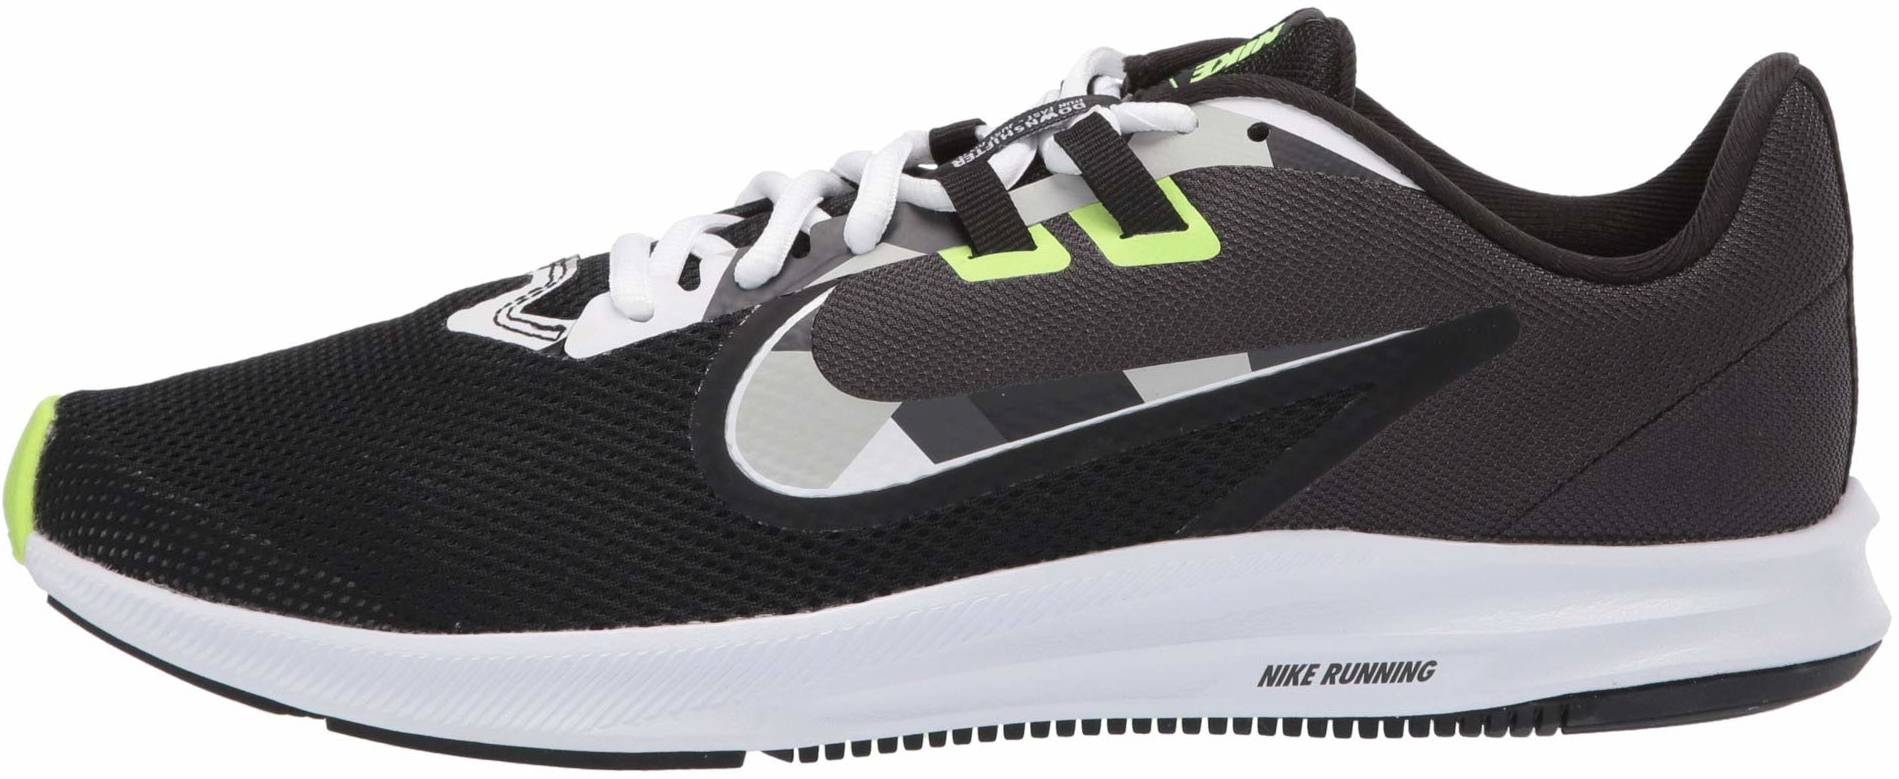 nike running shoes ranked